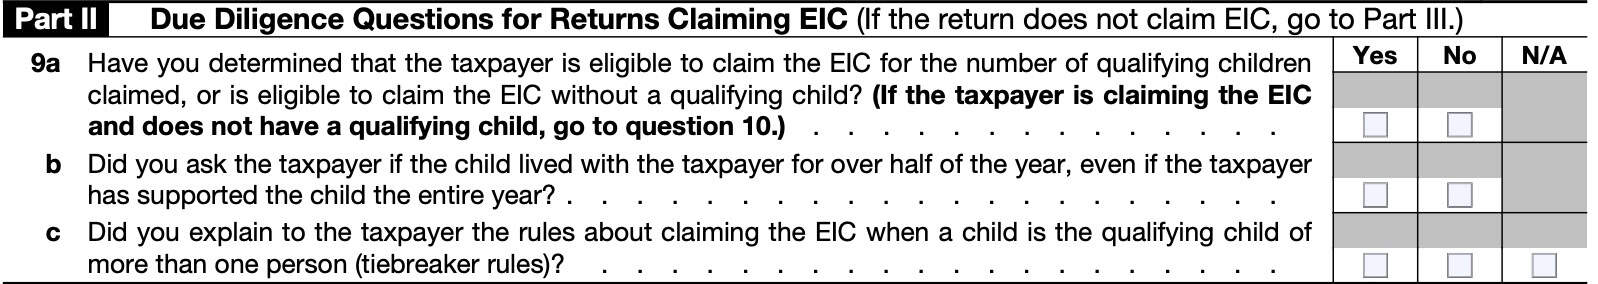 irs form 8867, part ii: due diligence questions for returns claiming eic